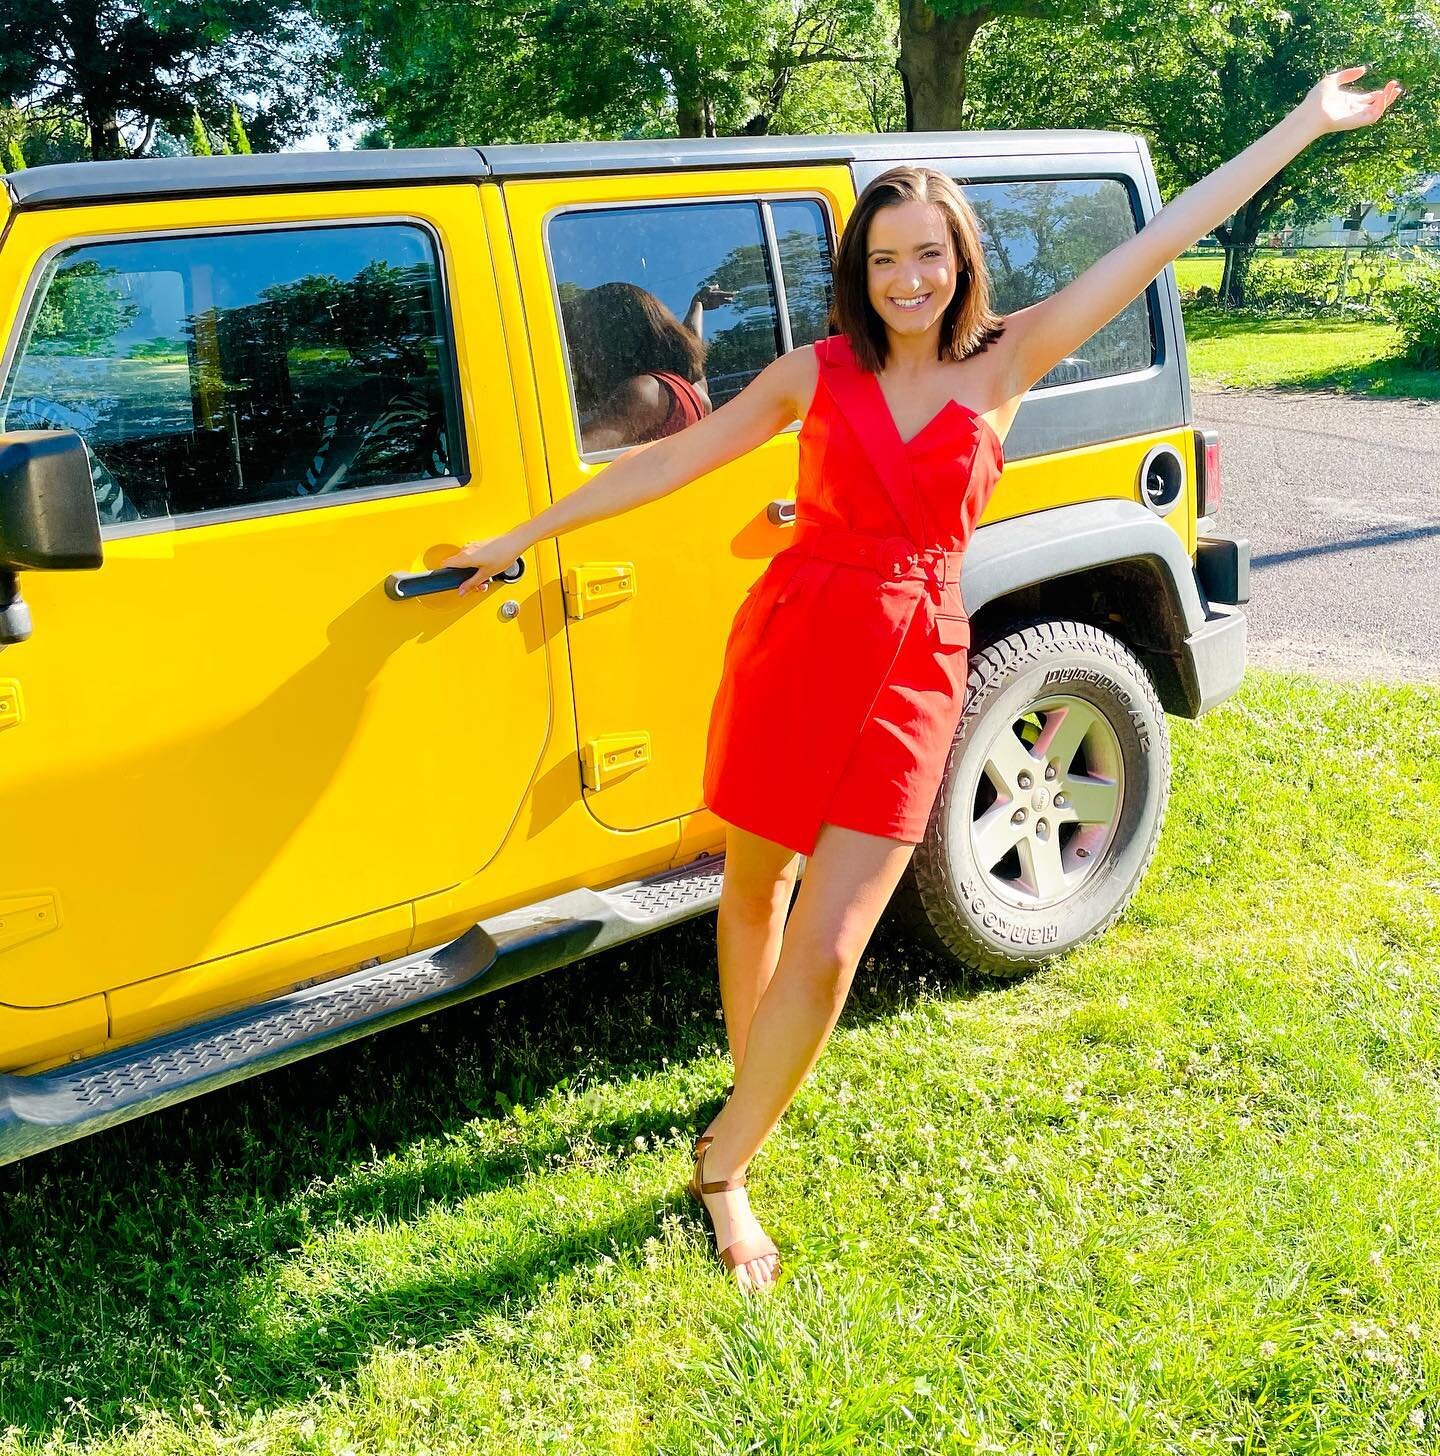 It&rsquo;s time to take care of business ⚡️👑🤩✨

On my way in my favorite lil dress in my favorite Jeep to my favorite week of the year in one of my favorite places in the state of Missouri. Any guesses? 🤪 IT&rsquo;S MISS MISSOURI WEEK. #MissMissou